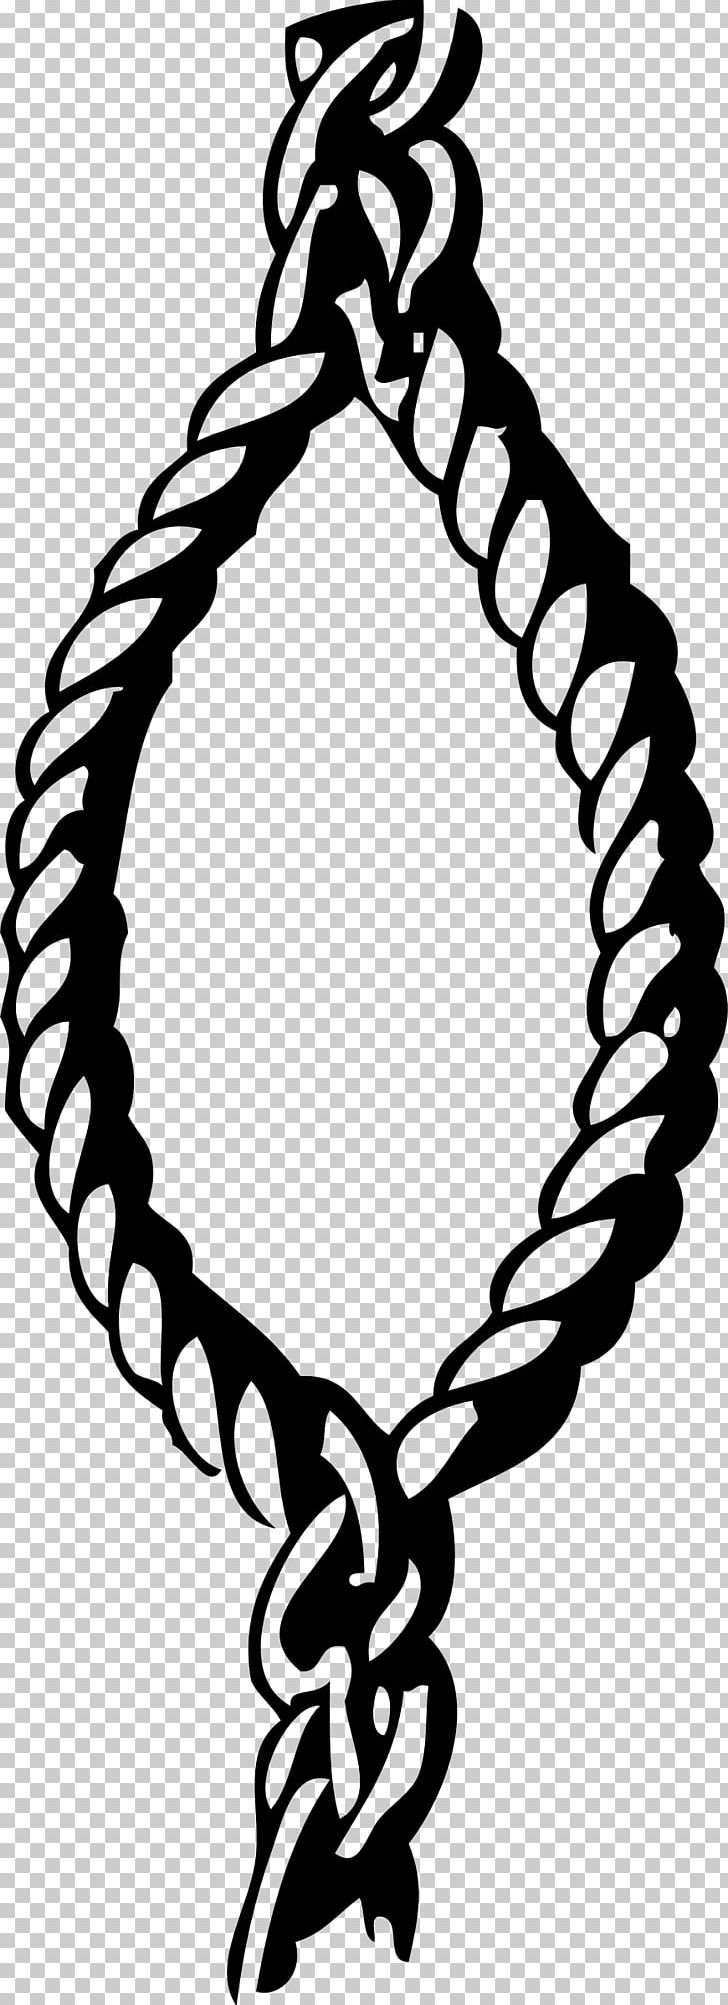 Knot Bowline On A Bight Seizing PNG, Clipart, Bight, Black, Black And White, Body Jewelry, Bowline Free PNG Download